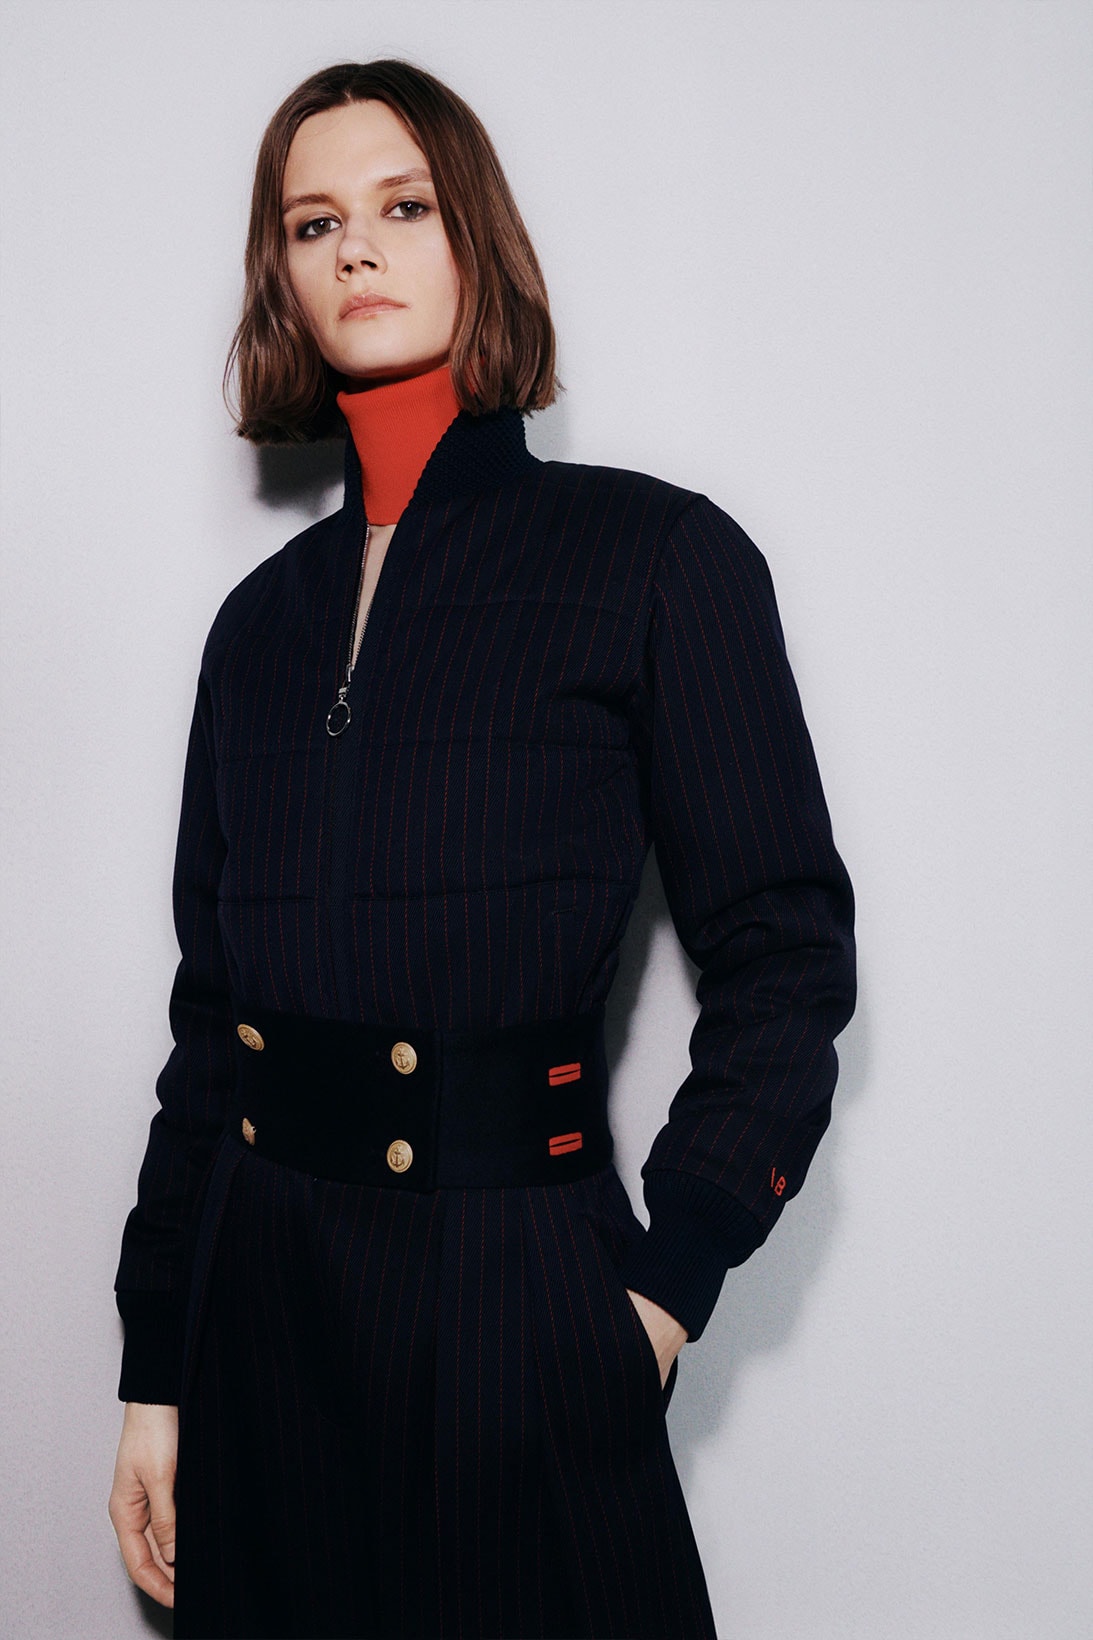 victoria beckham fall winter 2021 fw21 collection striped suit